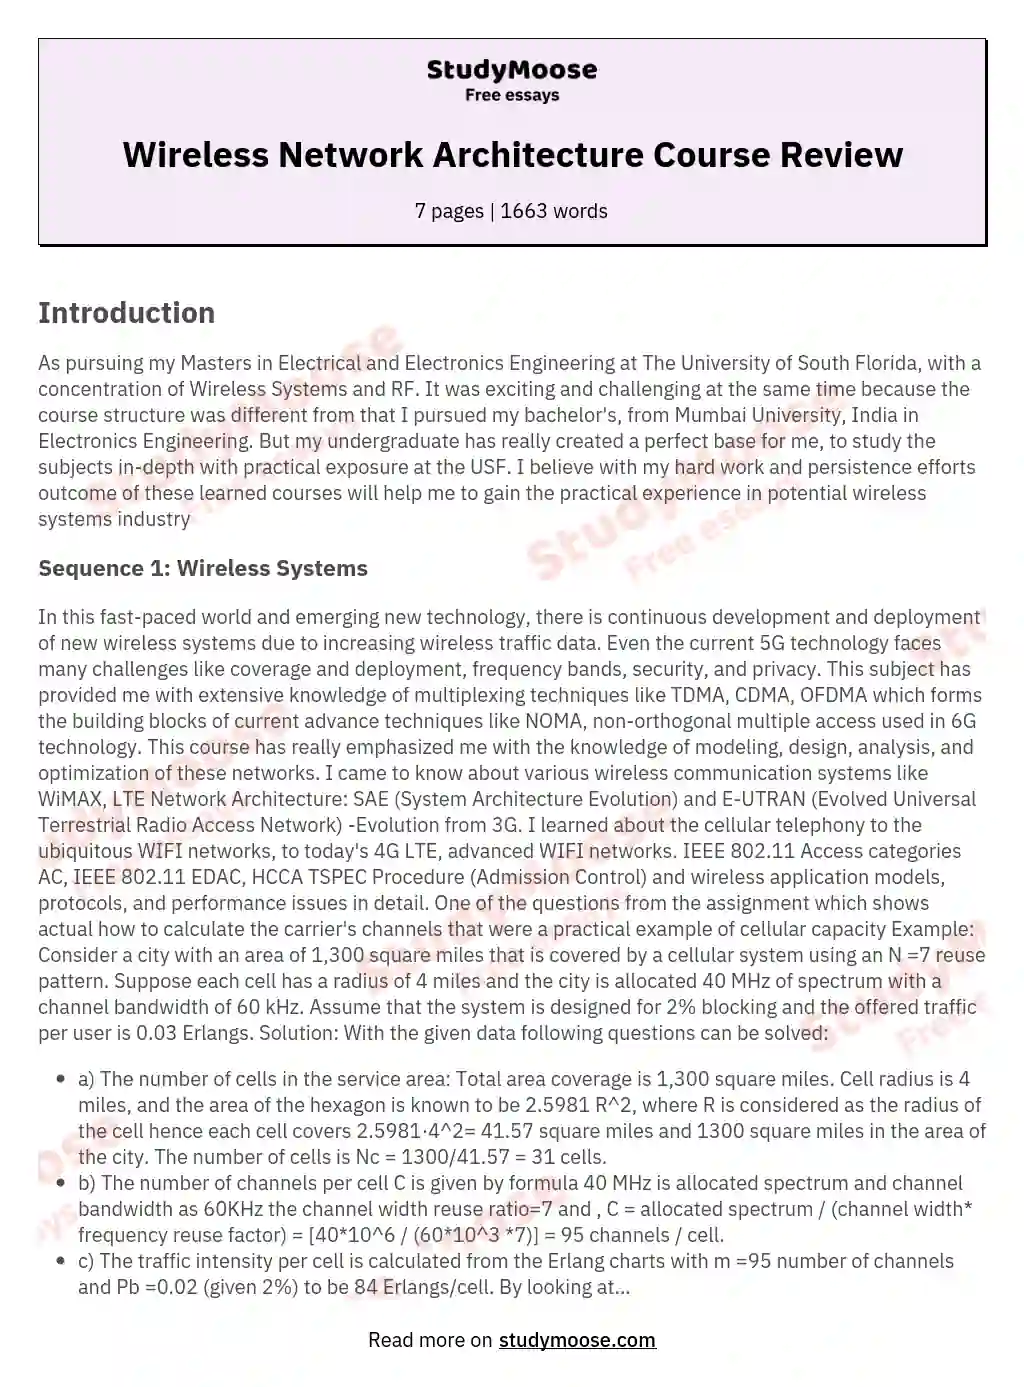 Wireless Network Architecture Course Review essay